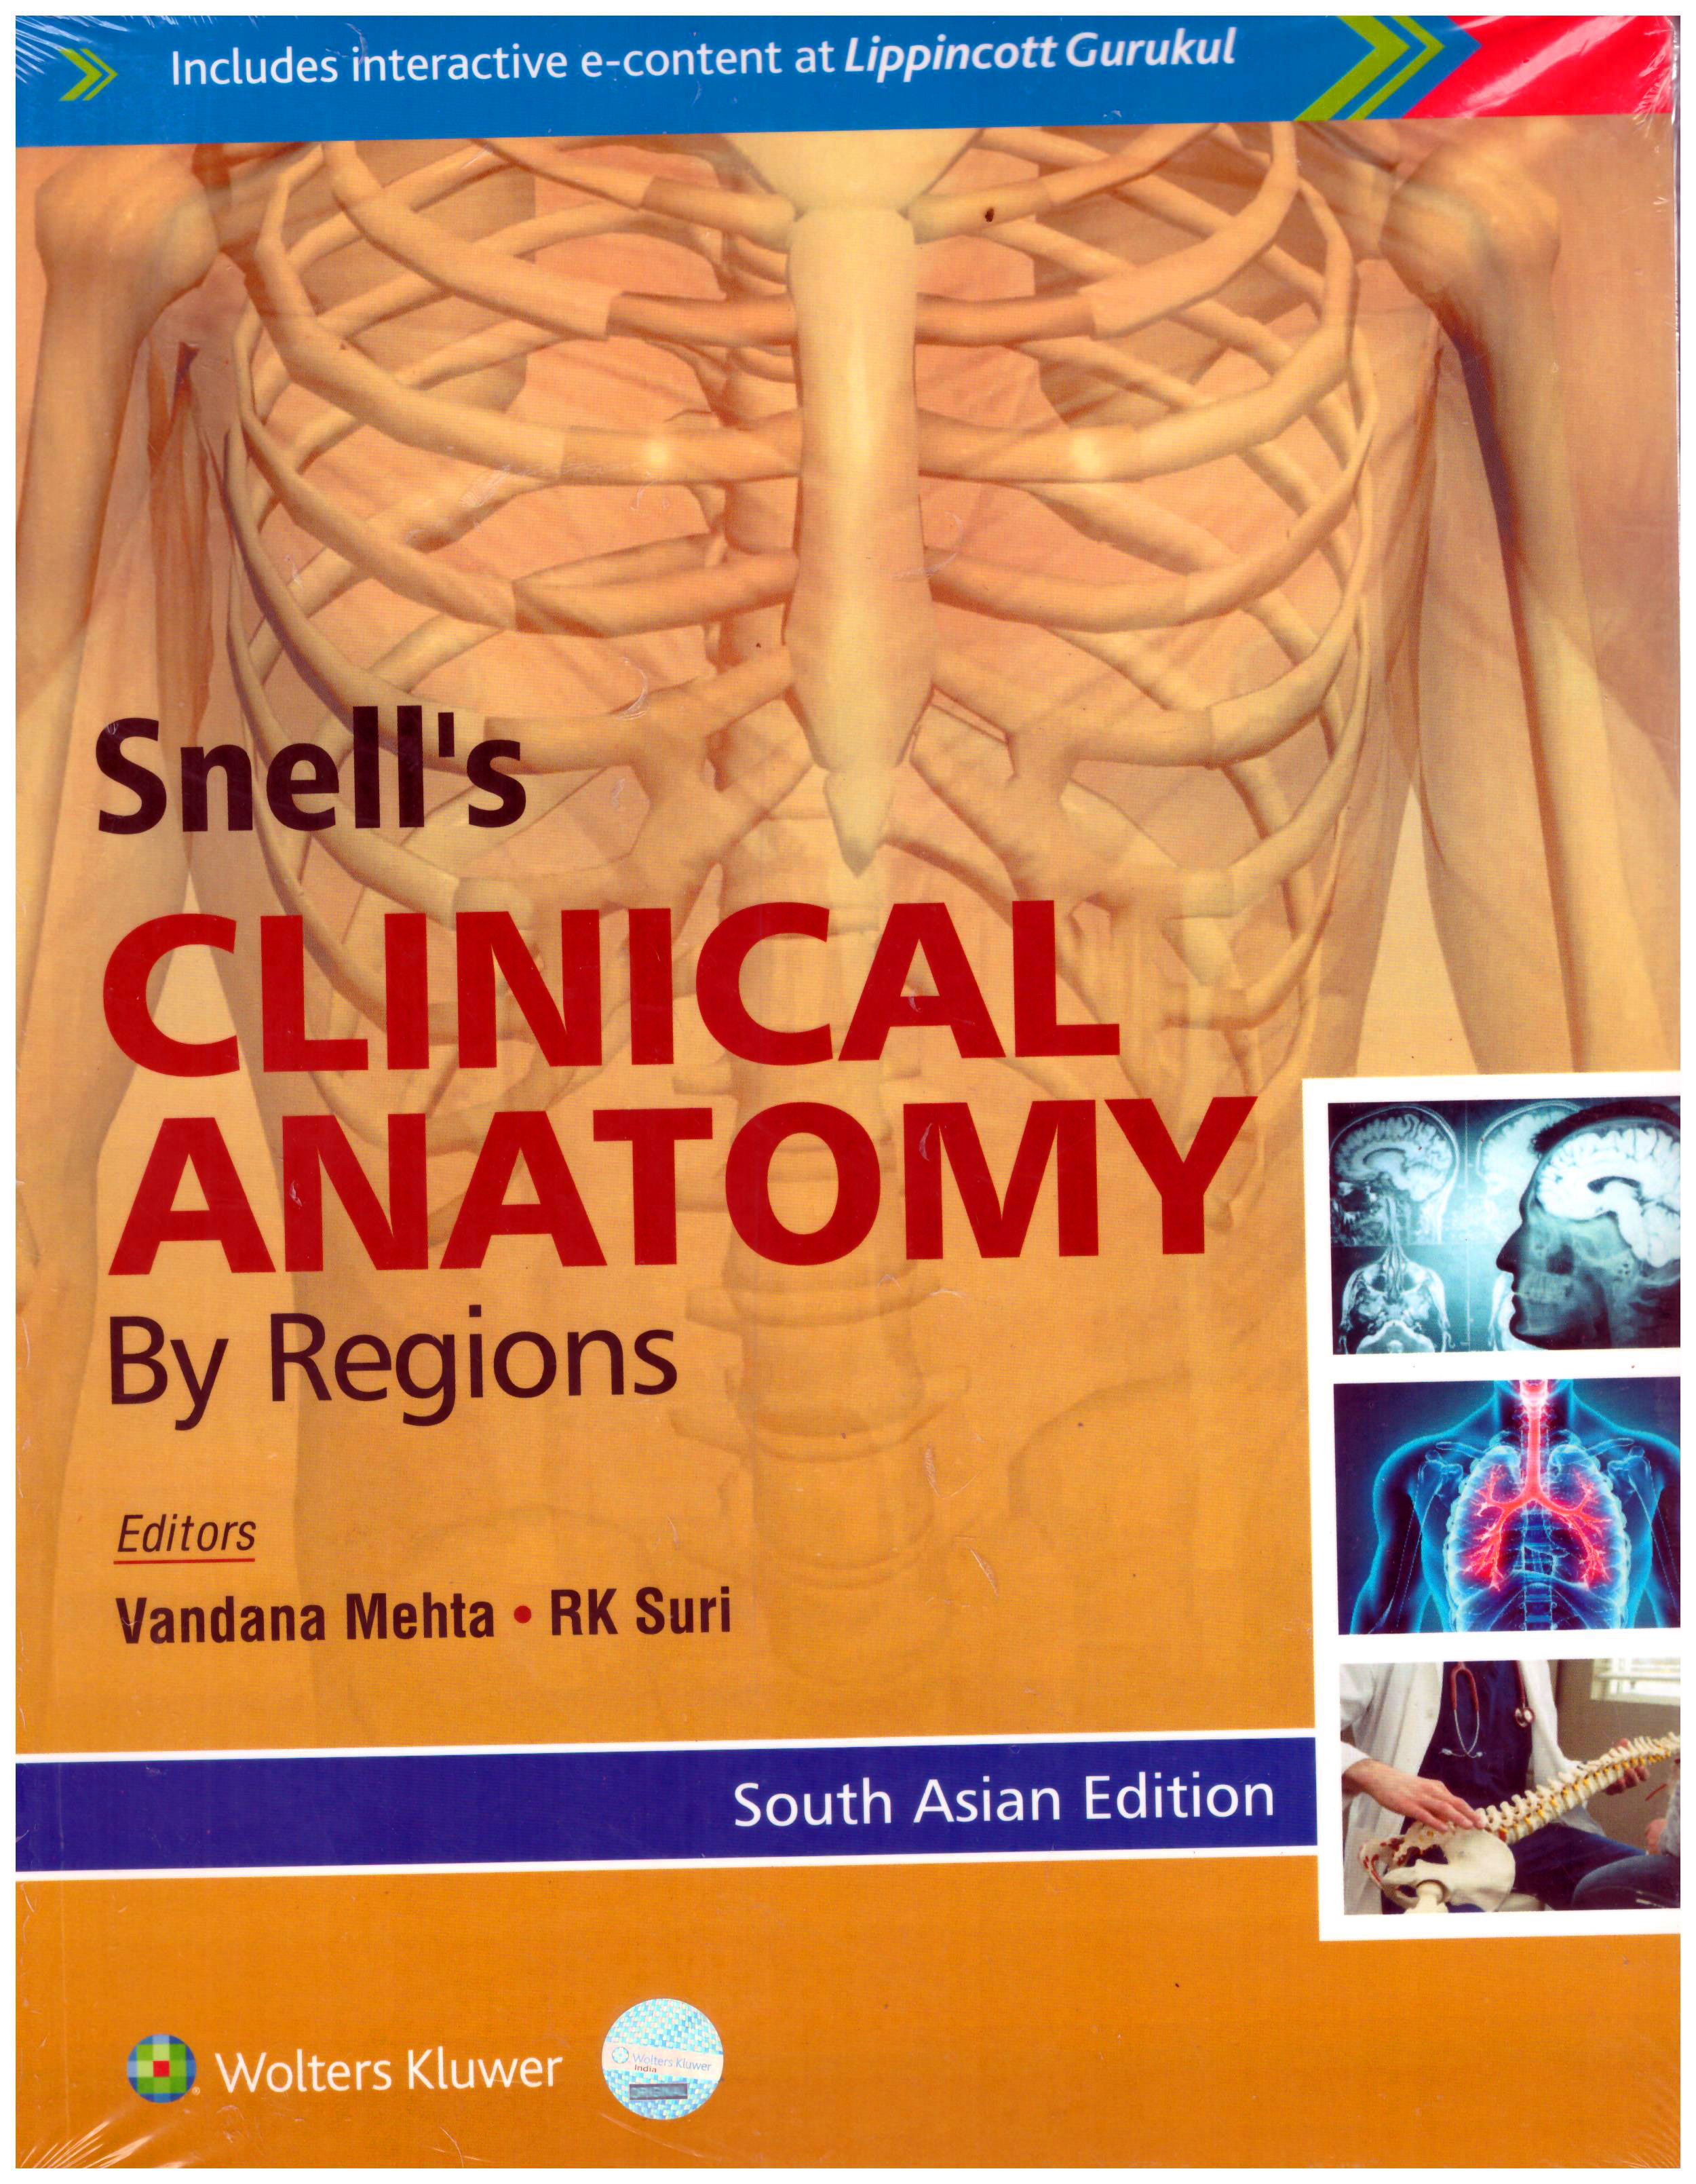 Snells Clinical Anatomy by Regions South Asian Edition